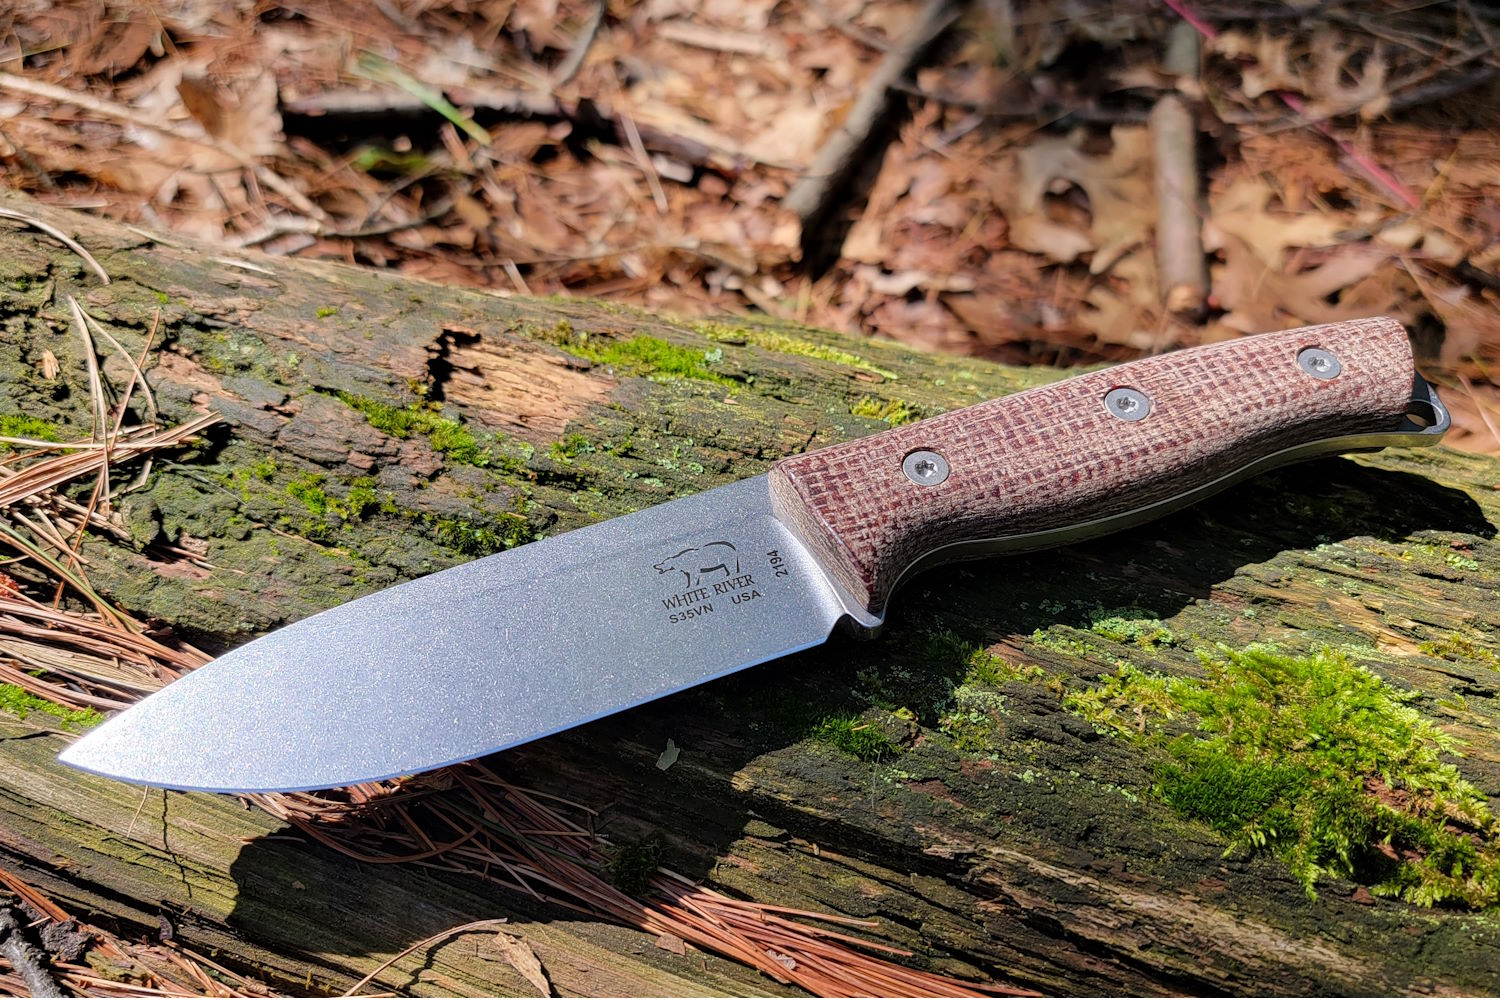 The Bushcraft Blade You’ve Been Waiting For: White River Ursus 45 Review